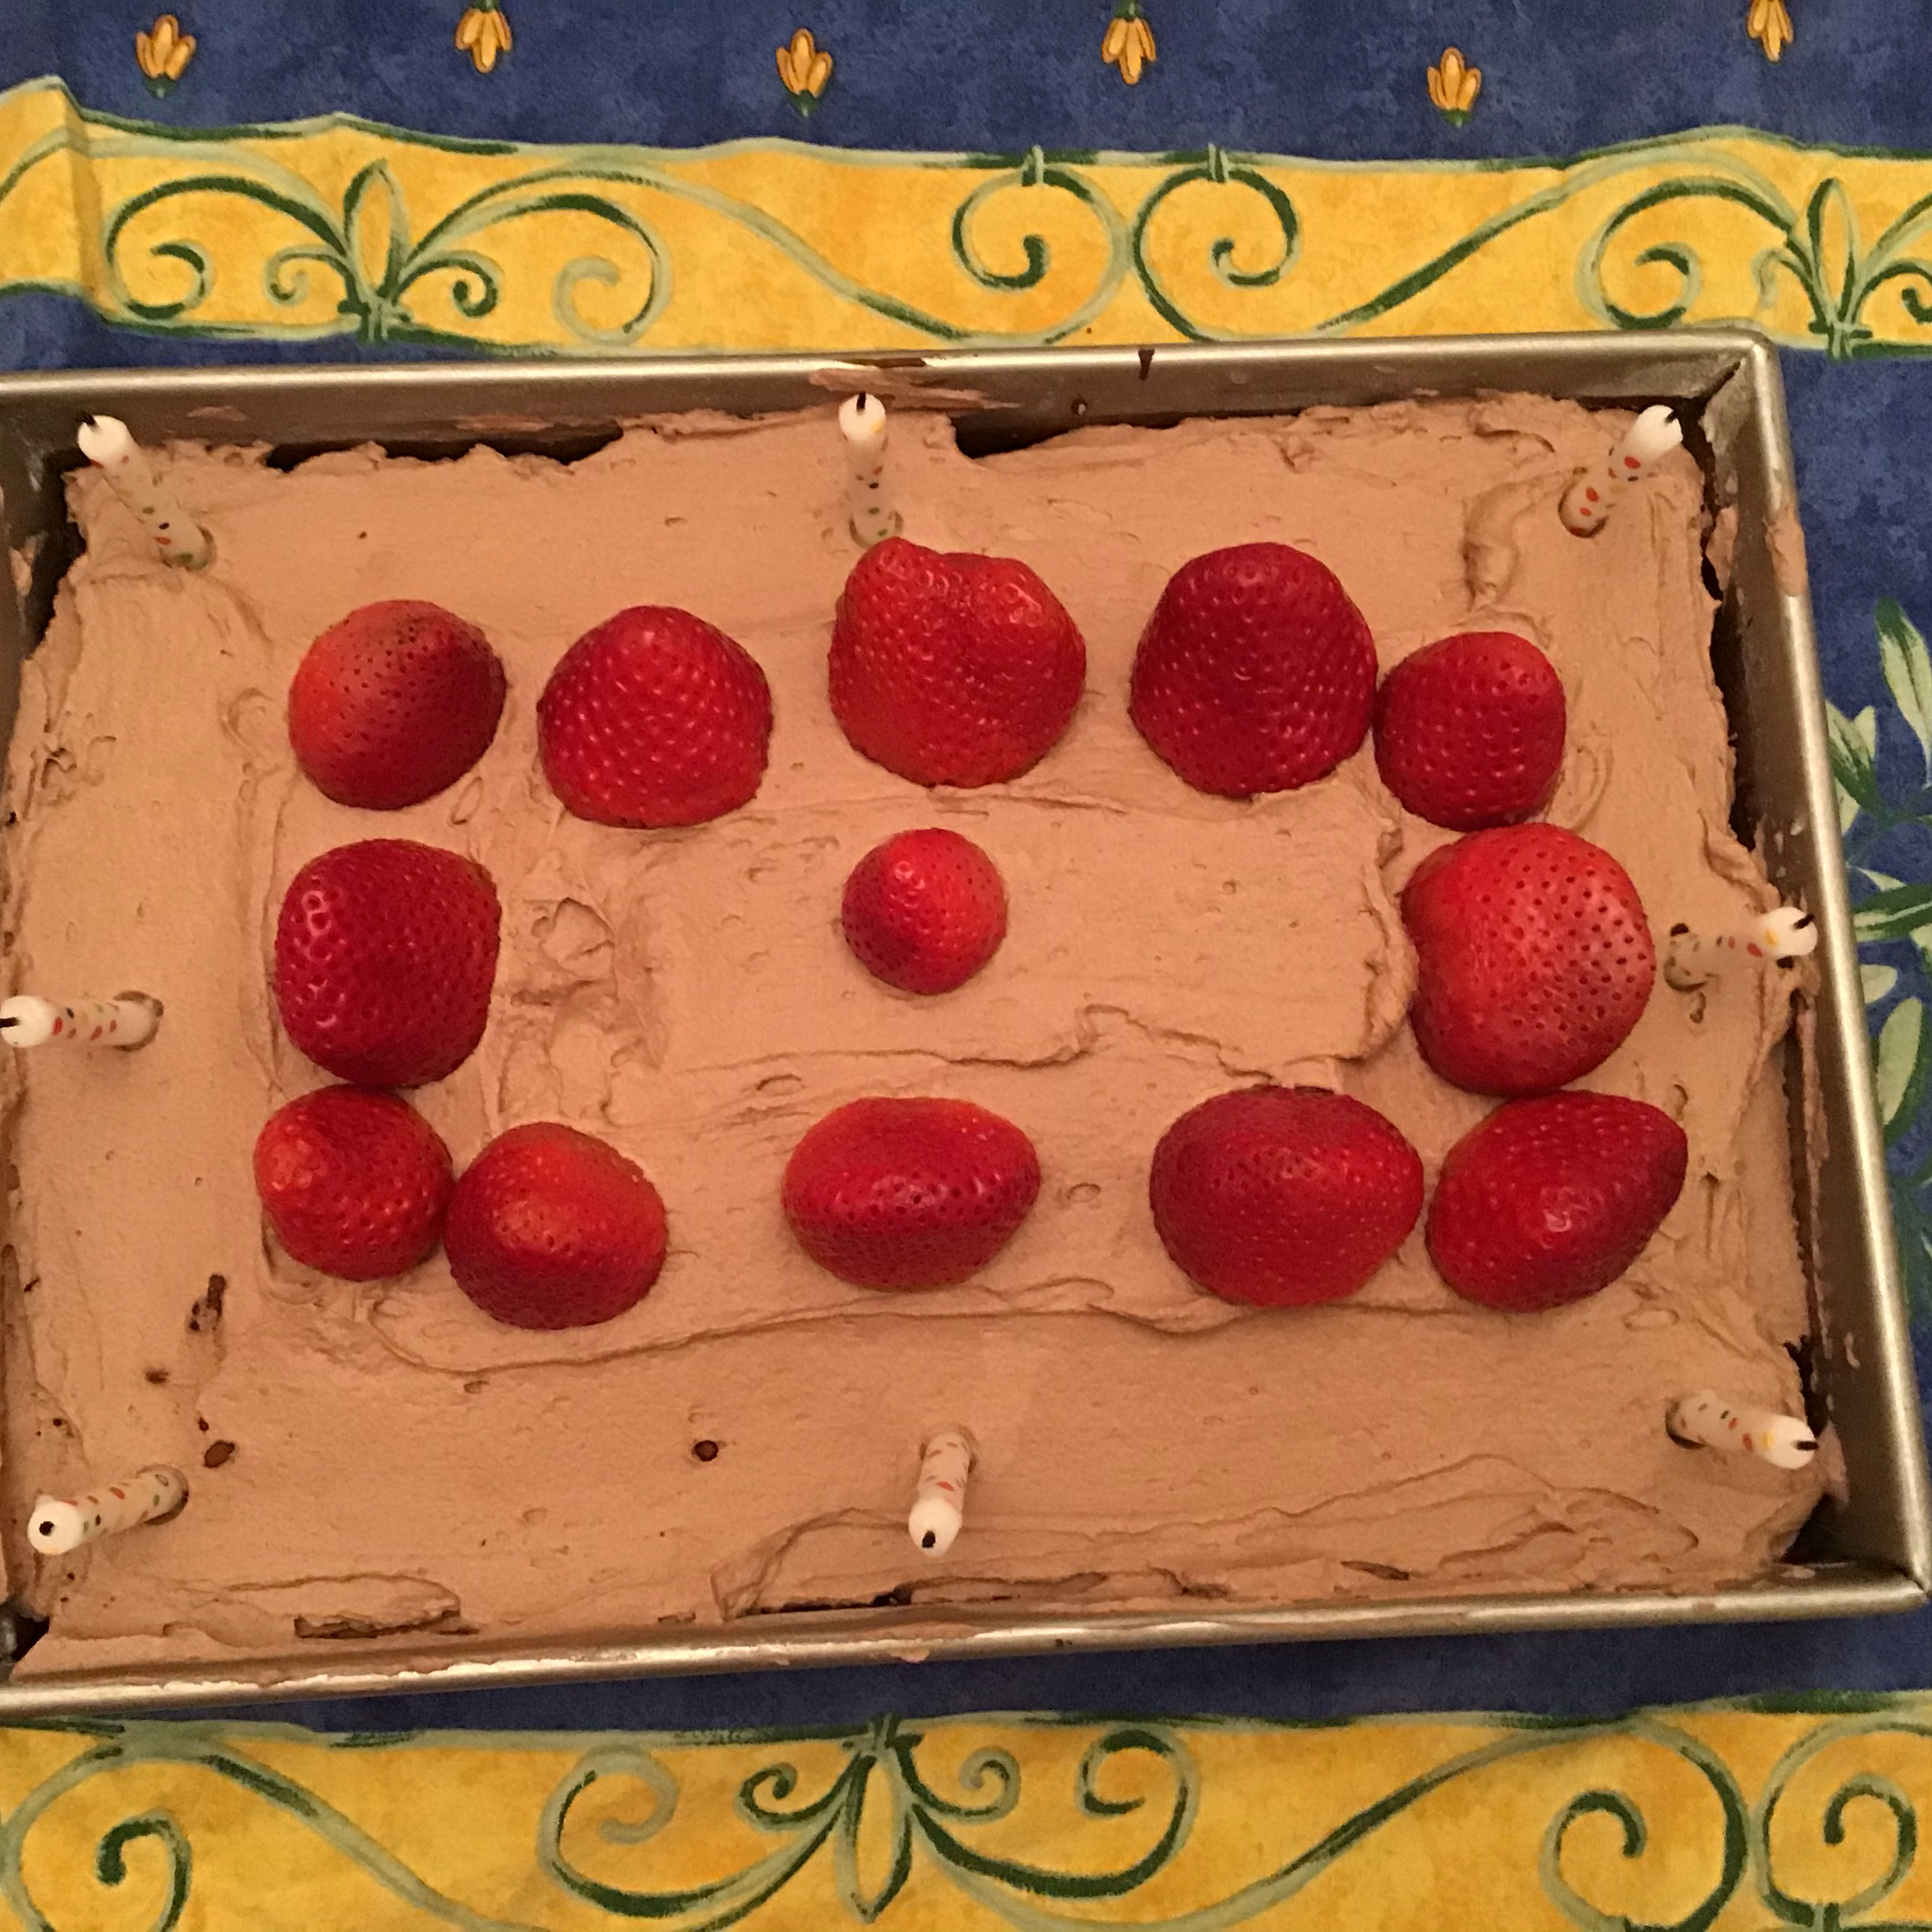 Chocolate Tres Leches Cake mm